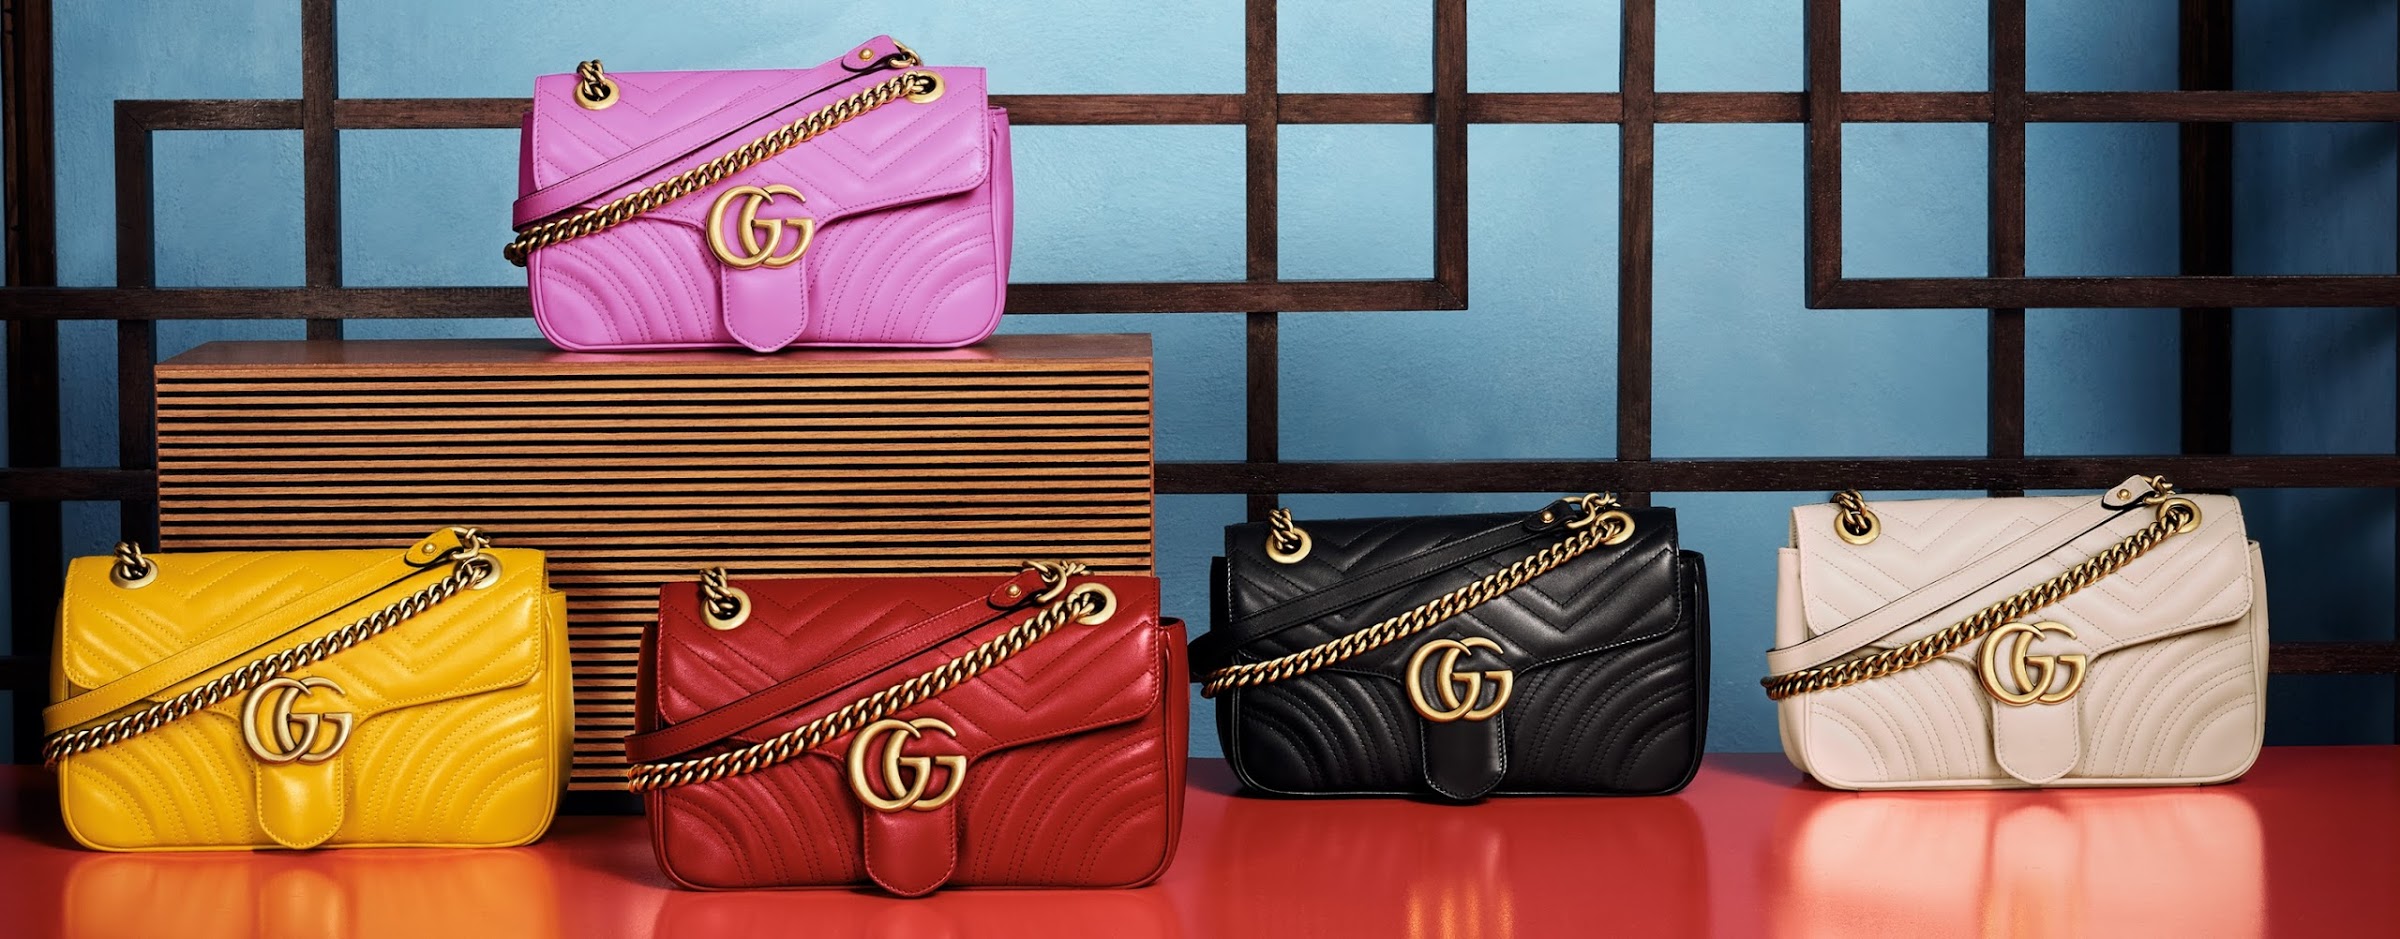 Gucci's Marmont Bags - BagAddicts Anonymous